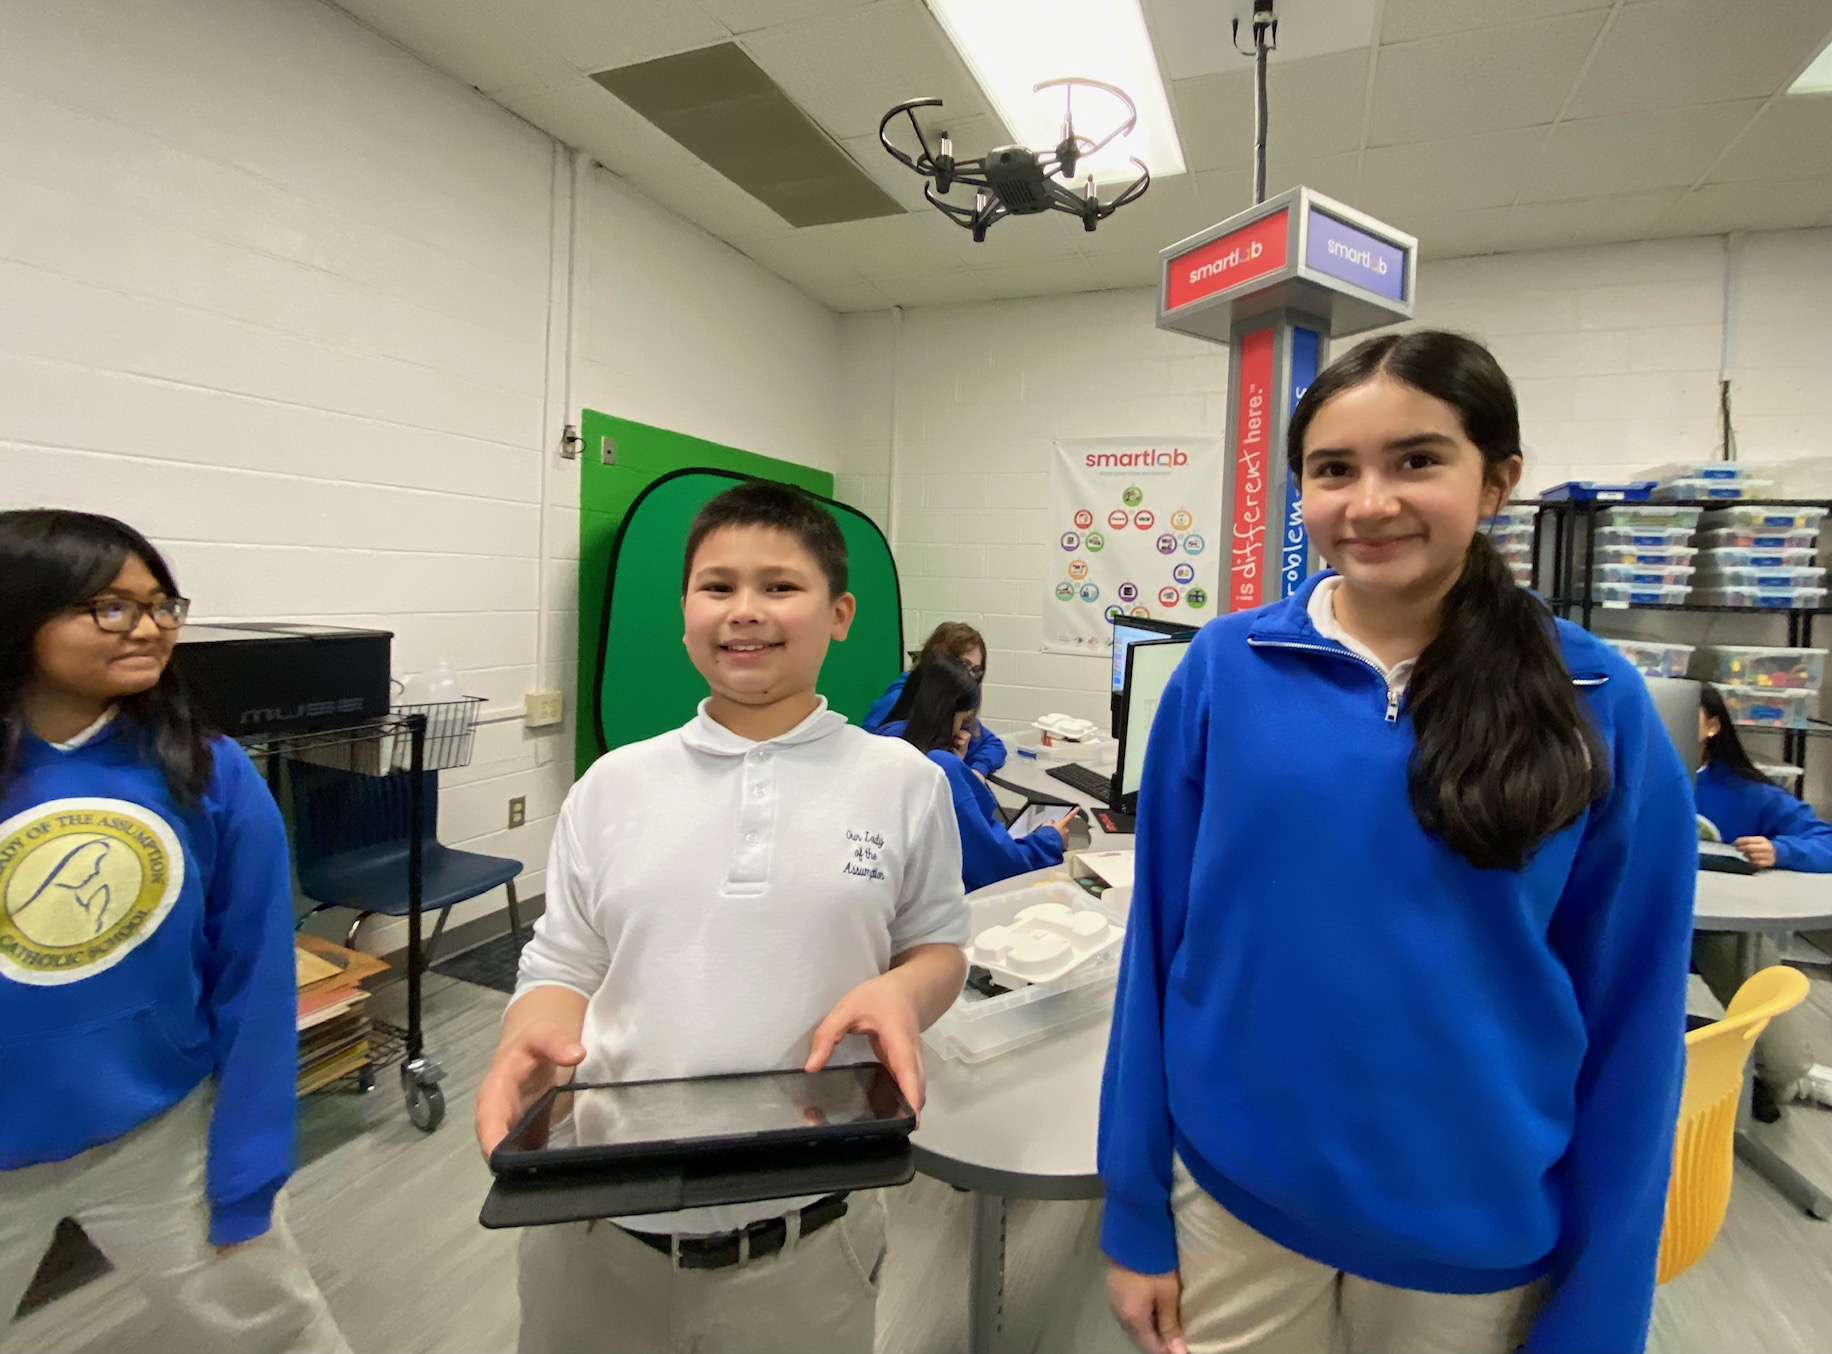 Students fly a drone in the technology lab at Our Lady of the Assumption, a Catholic school in Charlotte that has Opportunity Scholarship students.